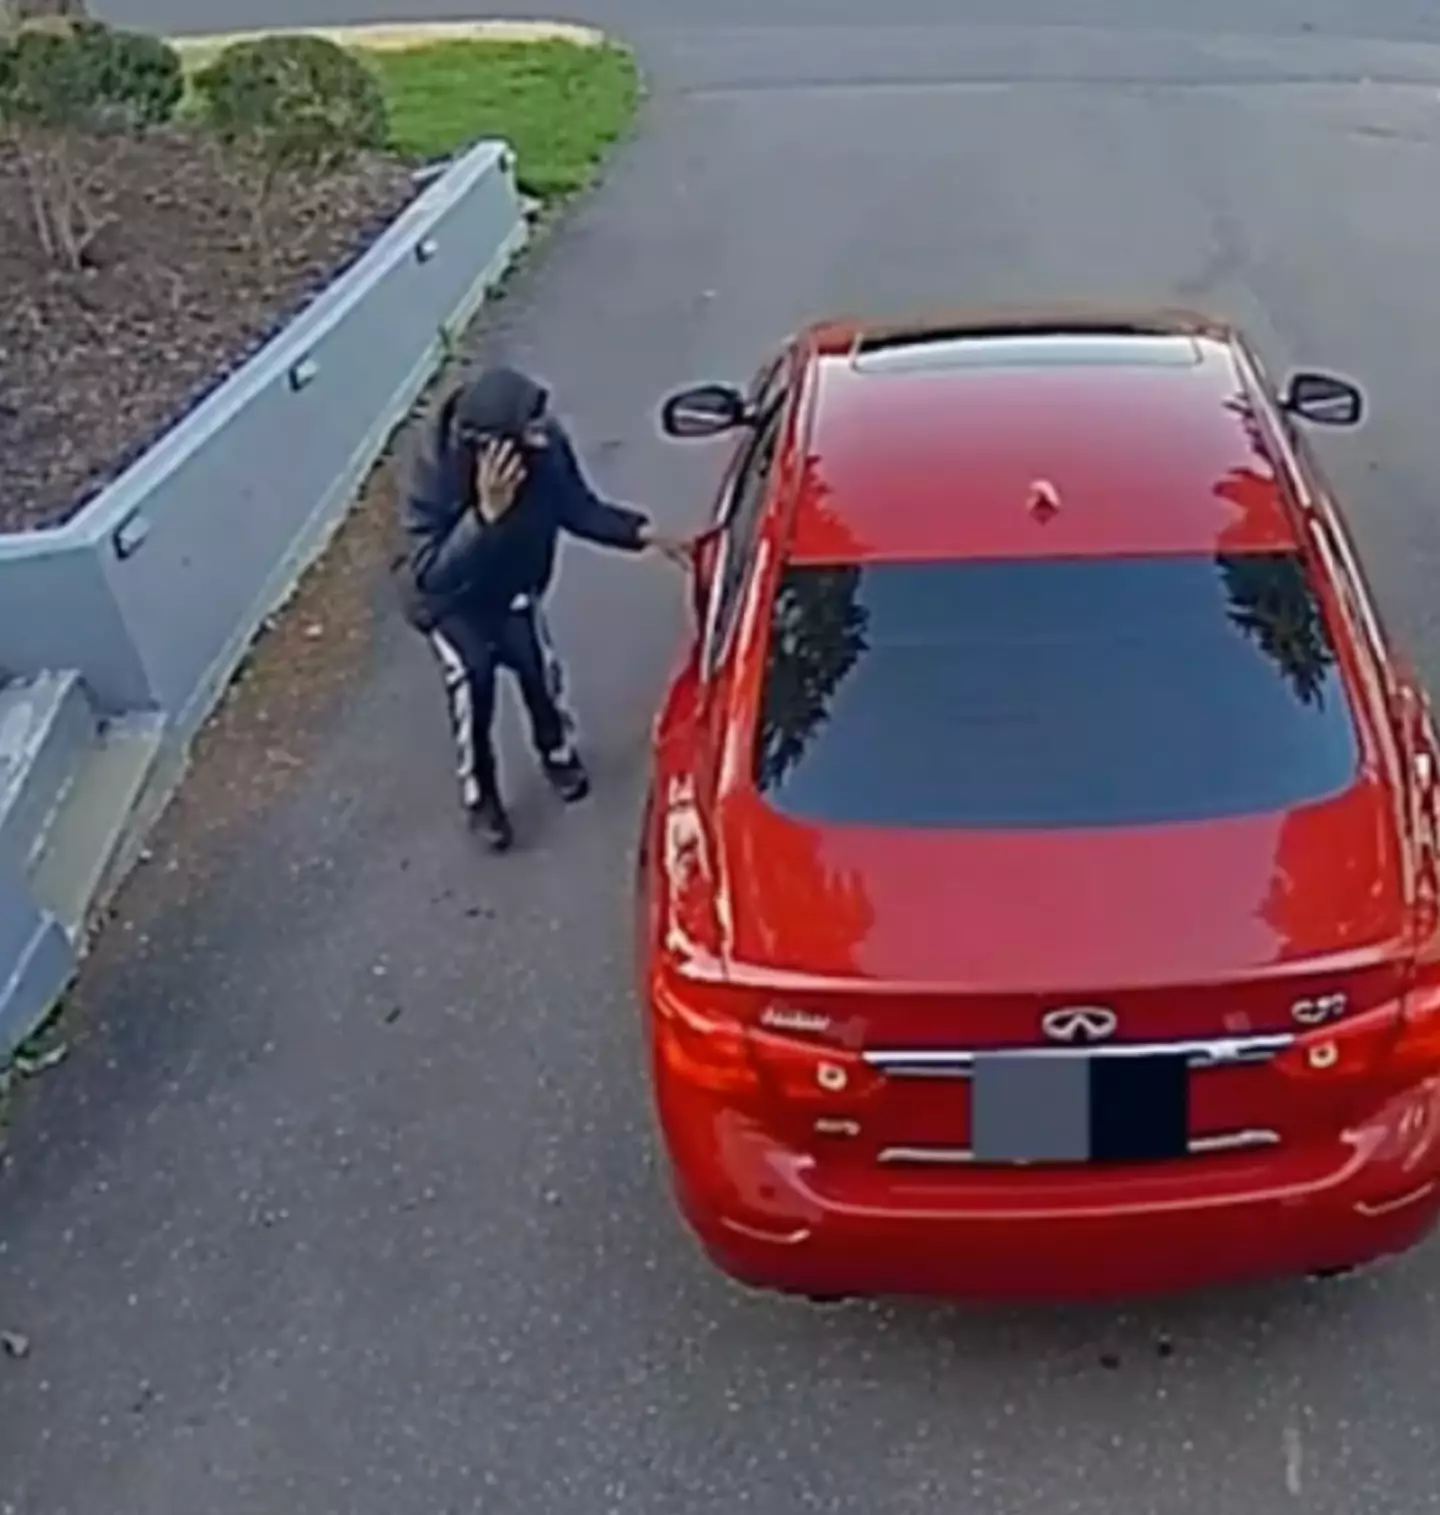 The attempted carjacking was done in broad daylight.